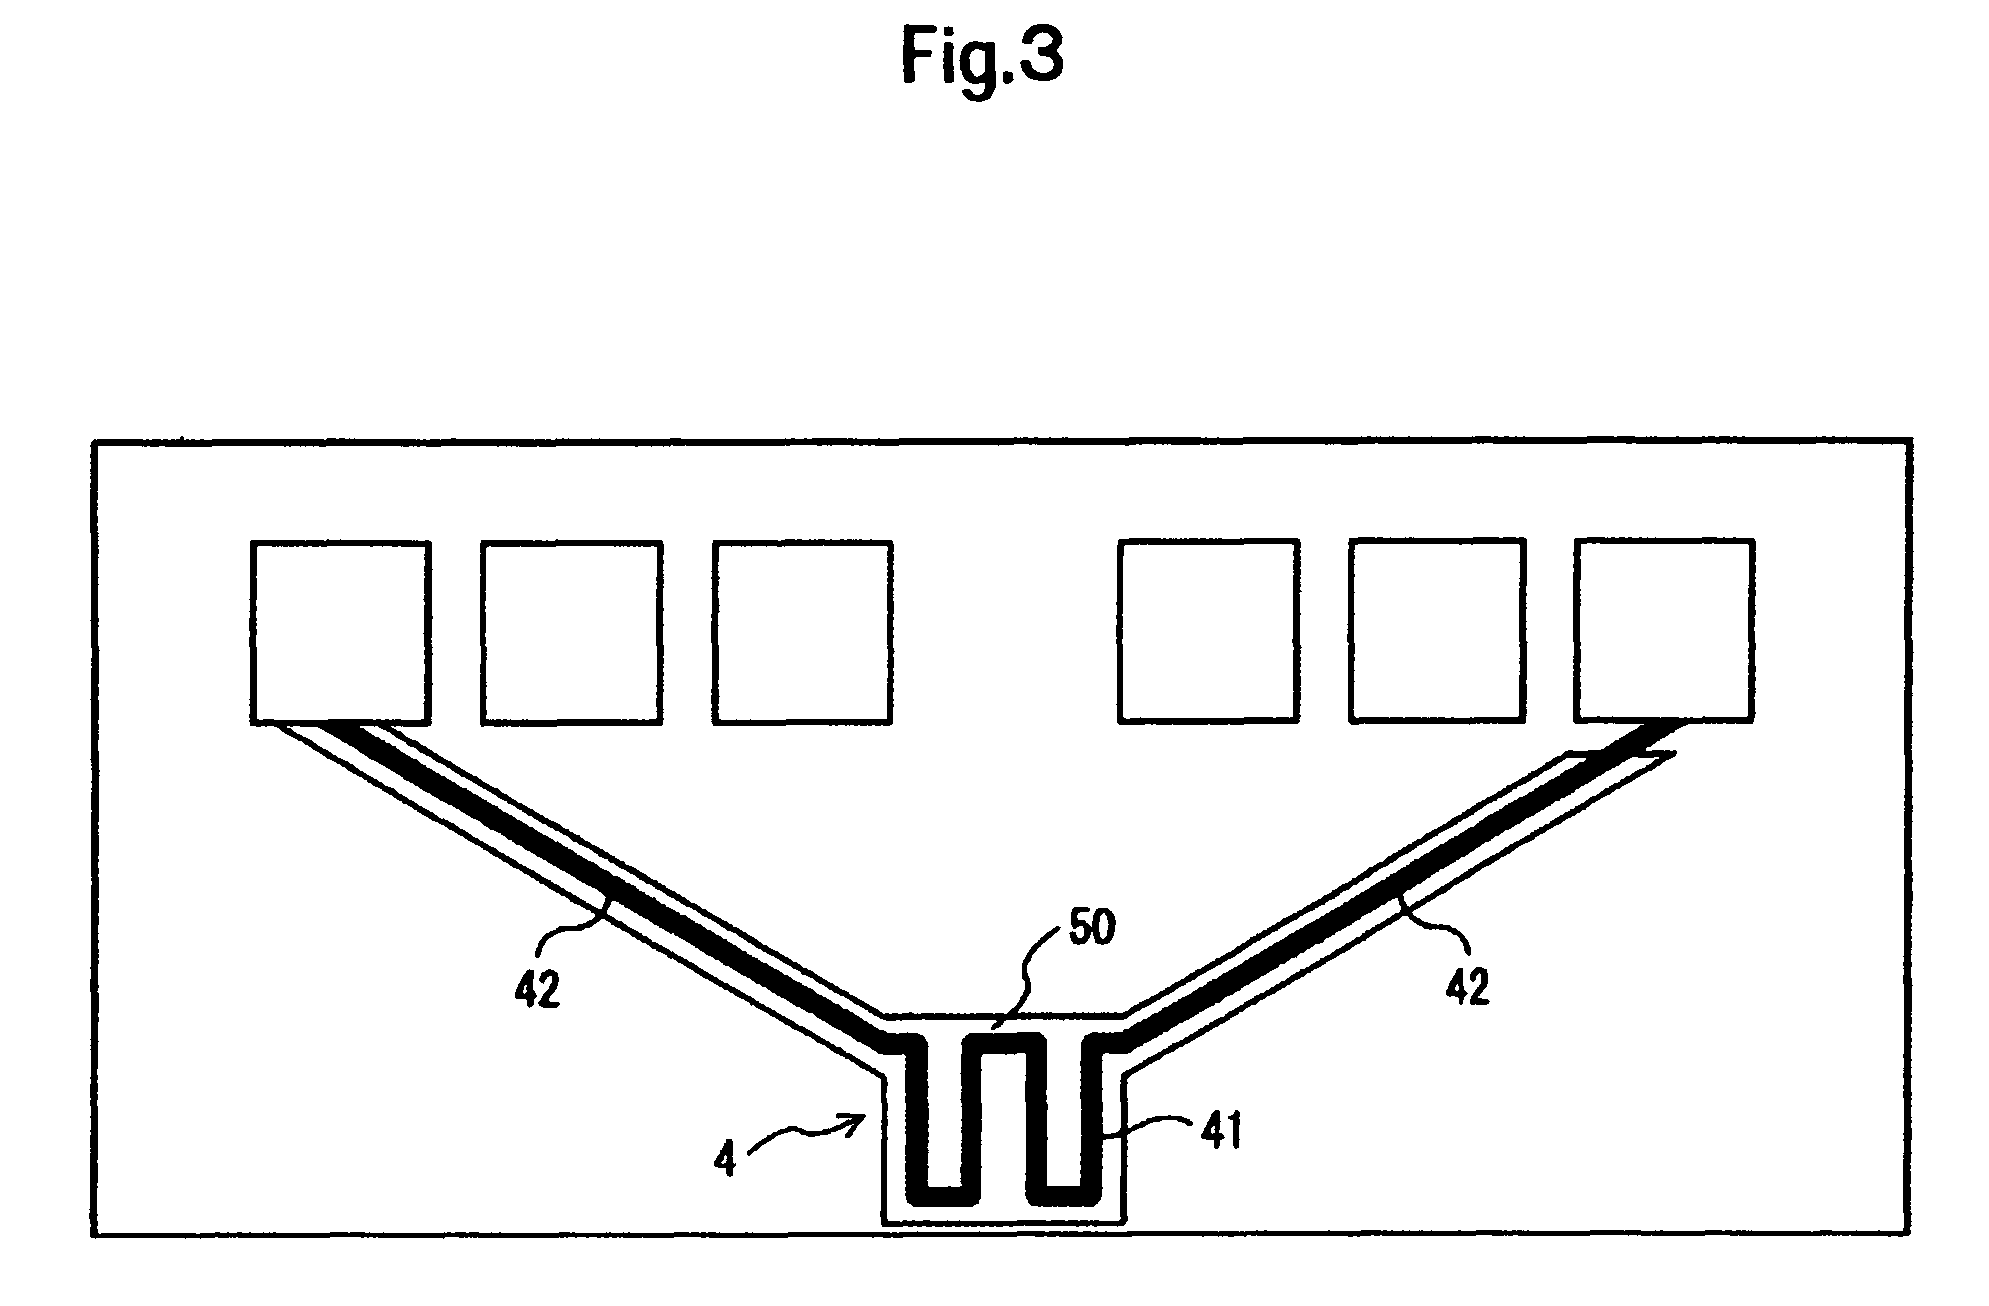 Thin film magnetic head with flying height adjustment capability